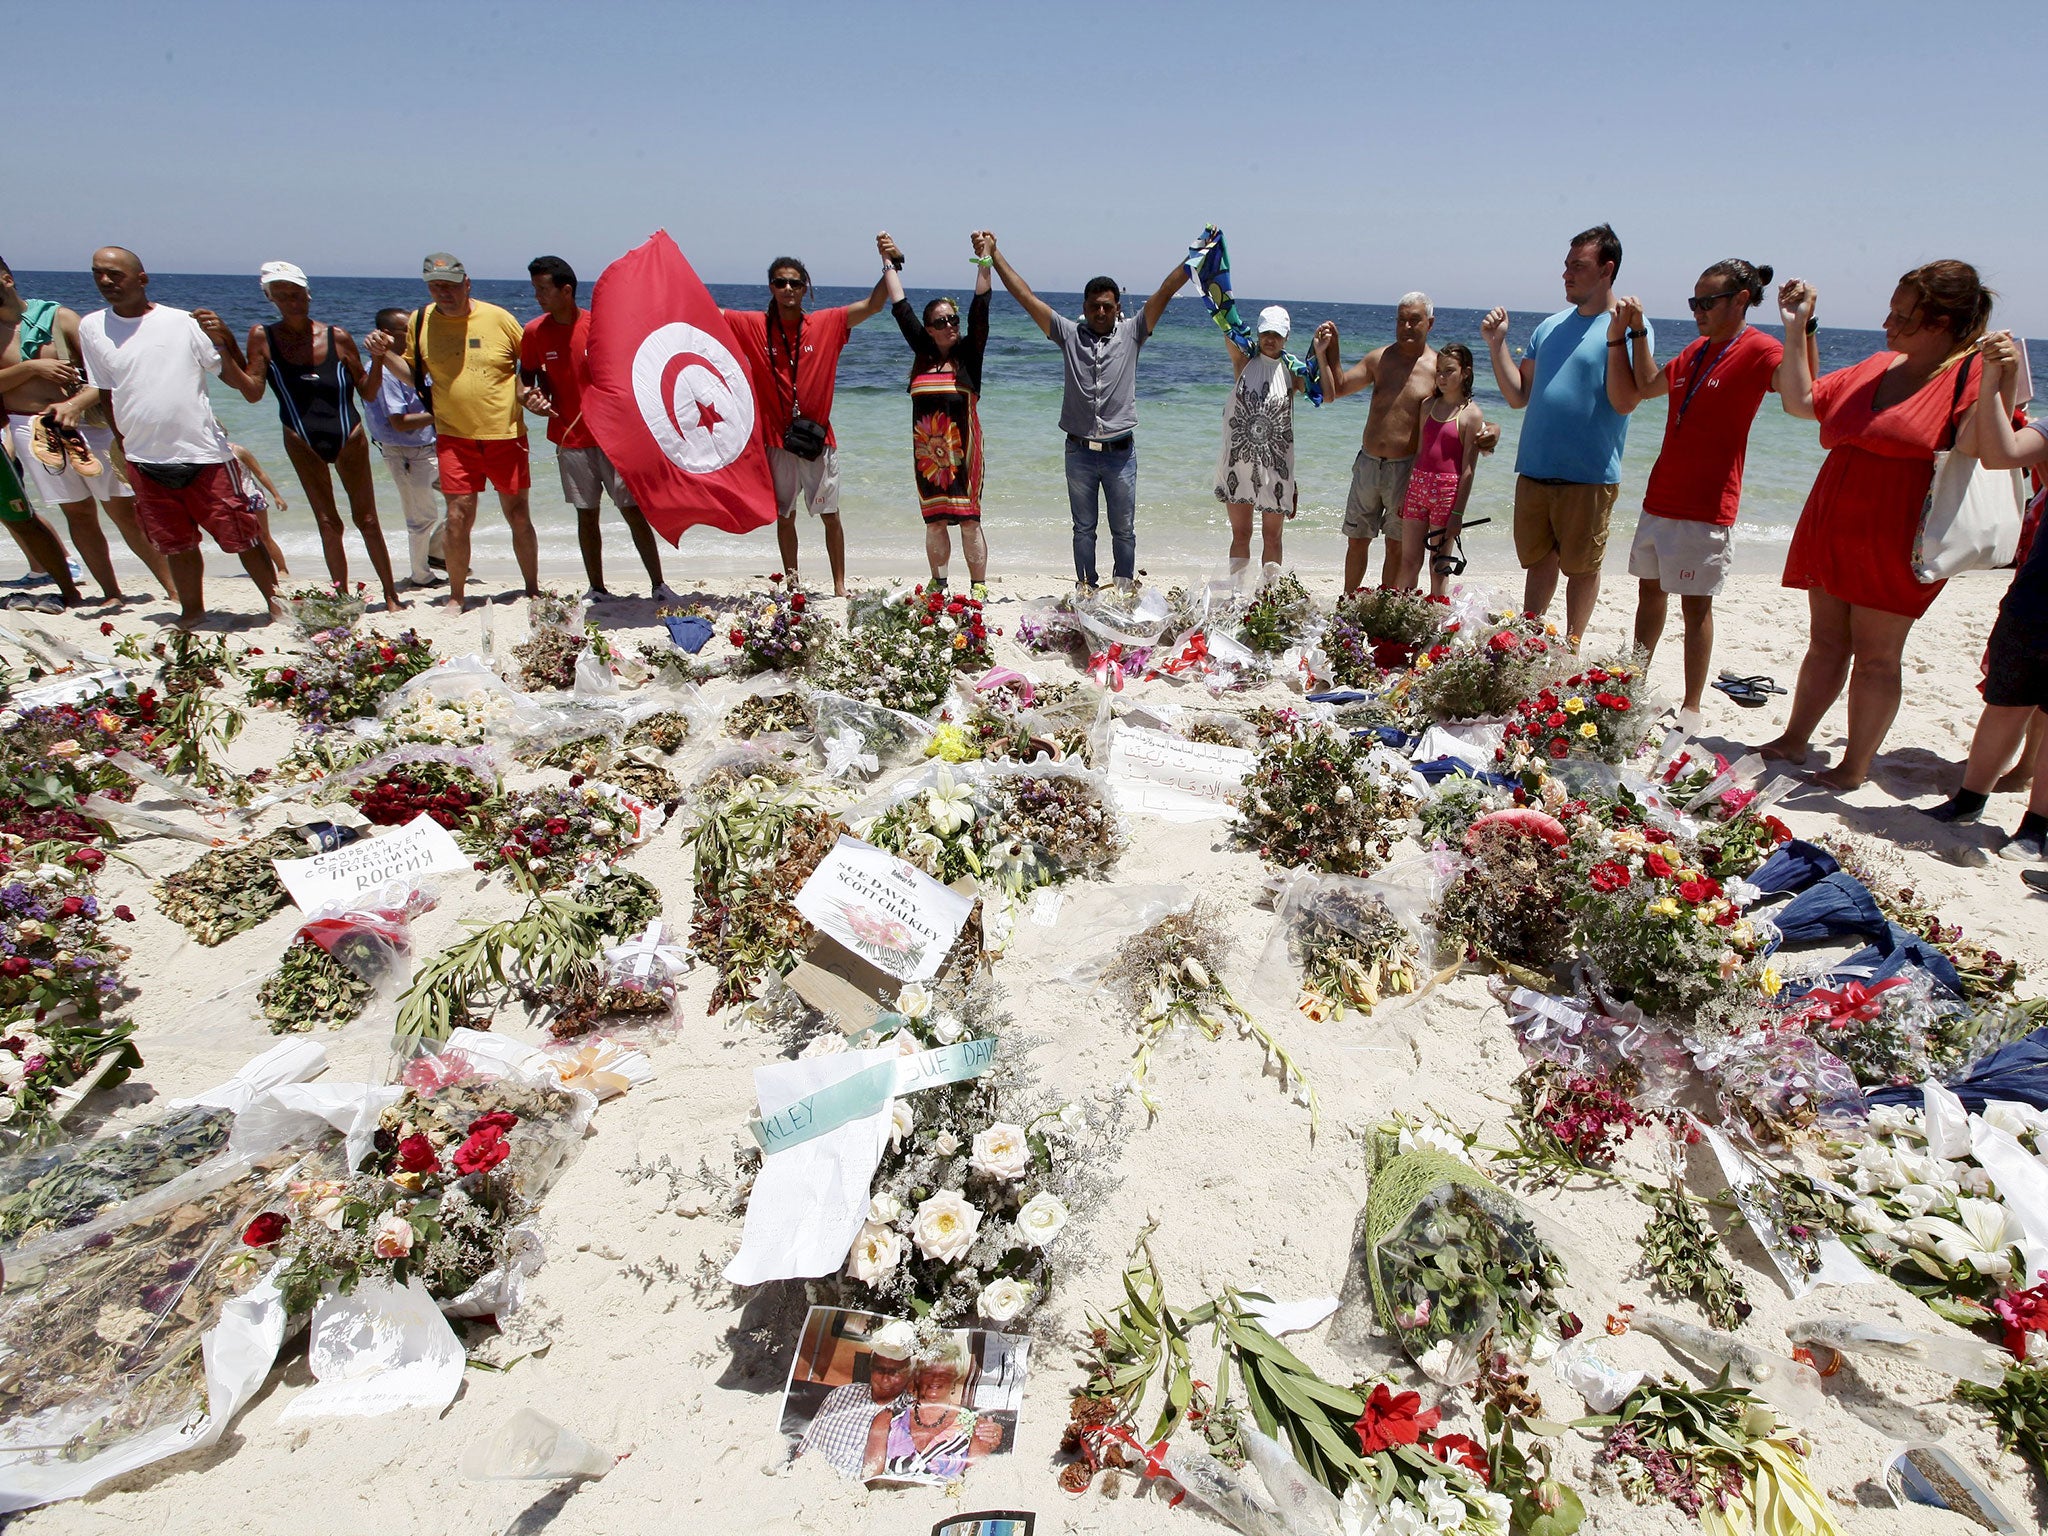 People join hands as they observe a minute's silence in memory of those killed in a recent attack by an Islamist gunman, at a beach in Sousse, Tunisia